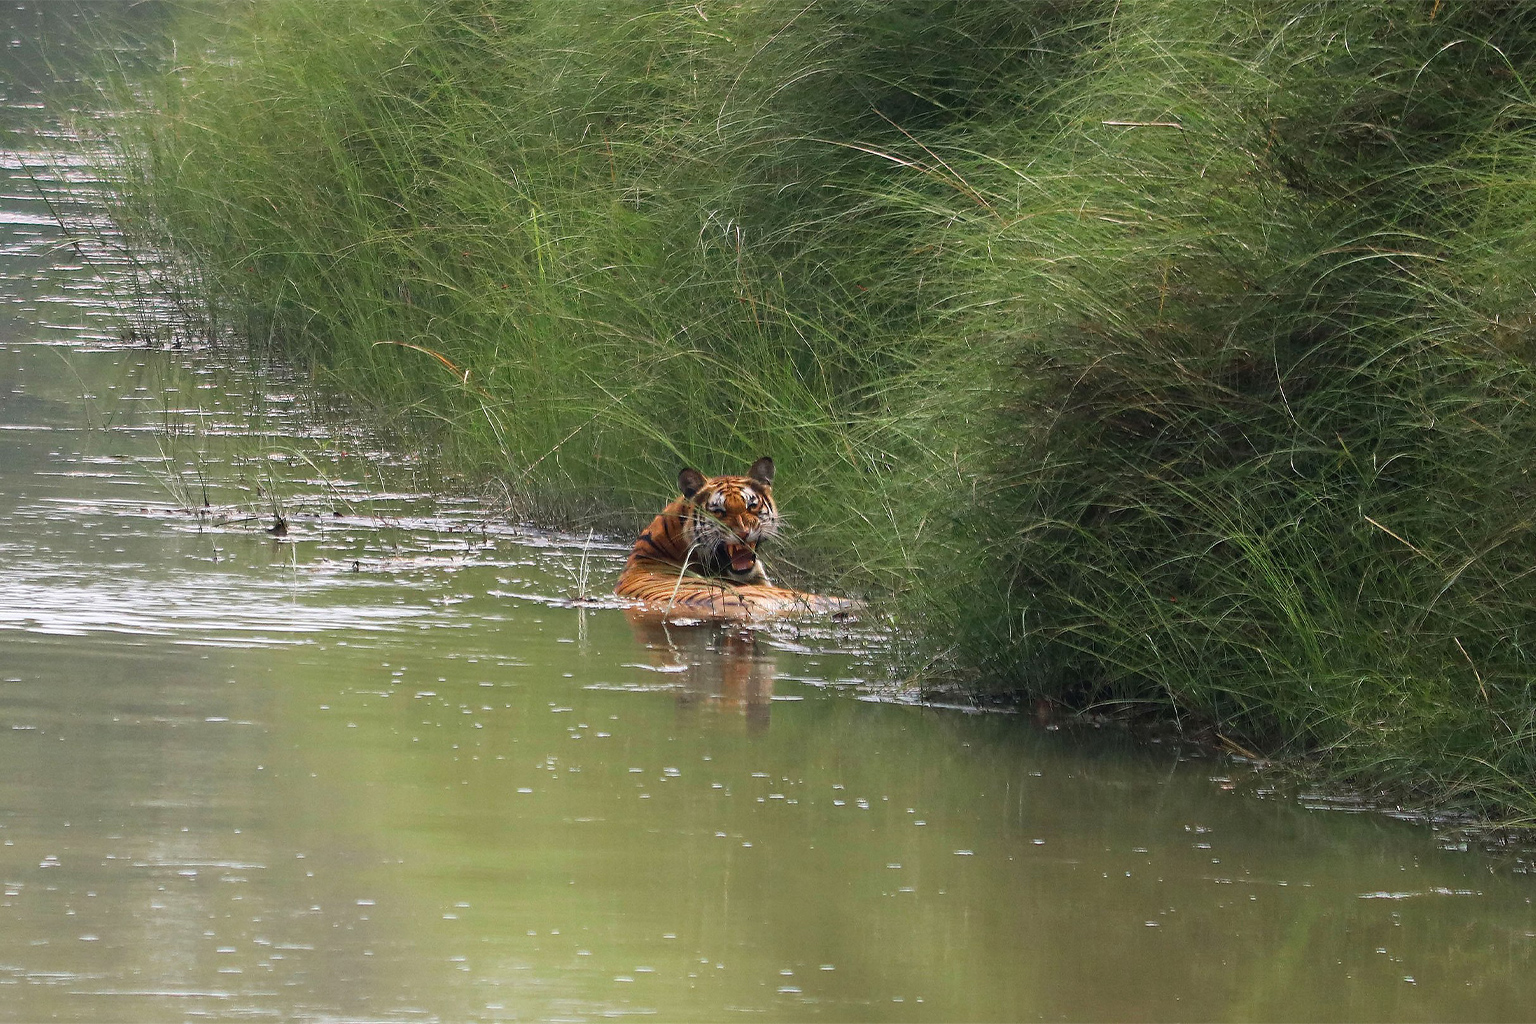 A tiger in water.